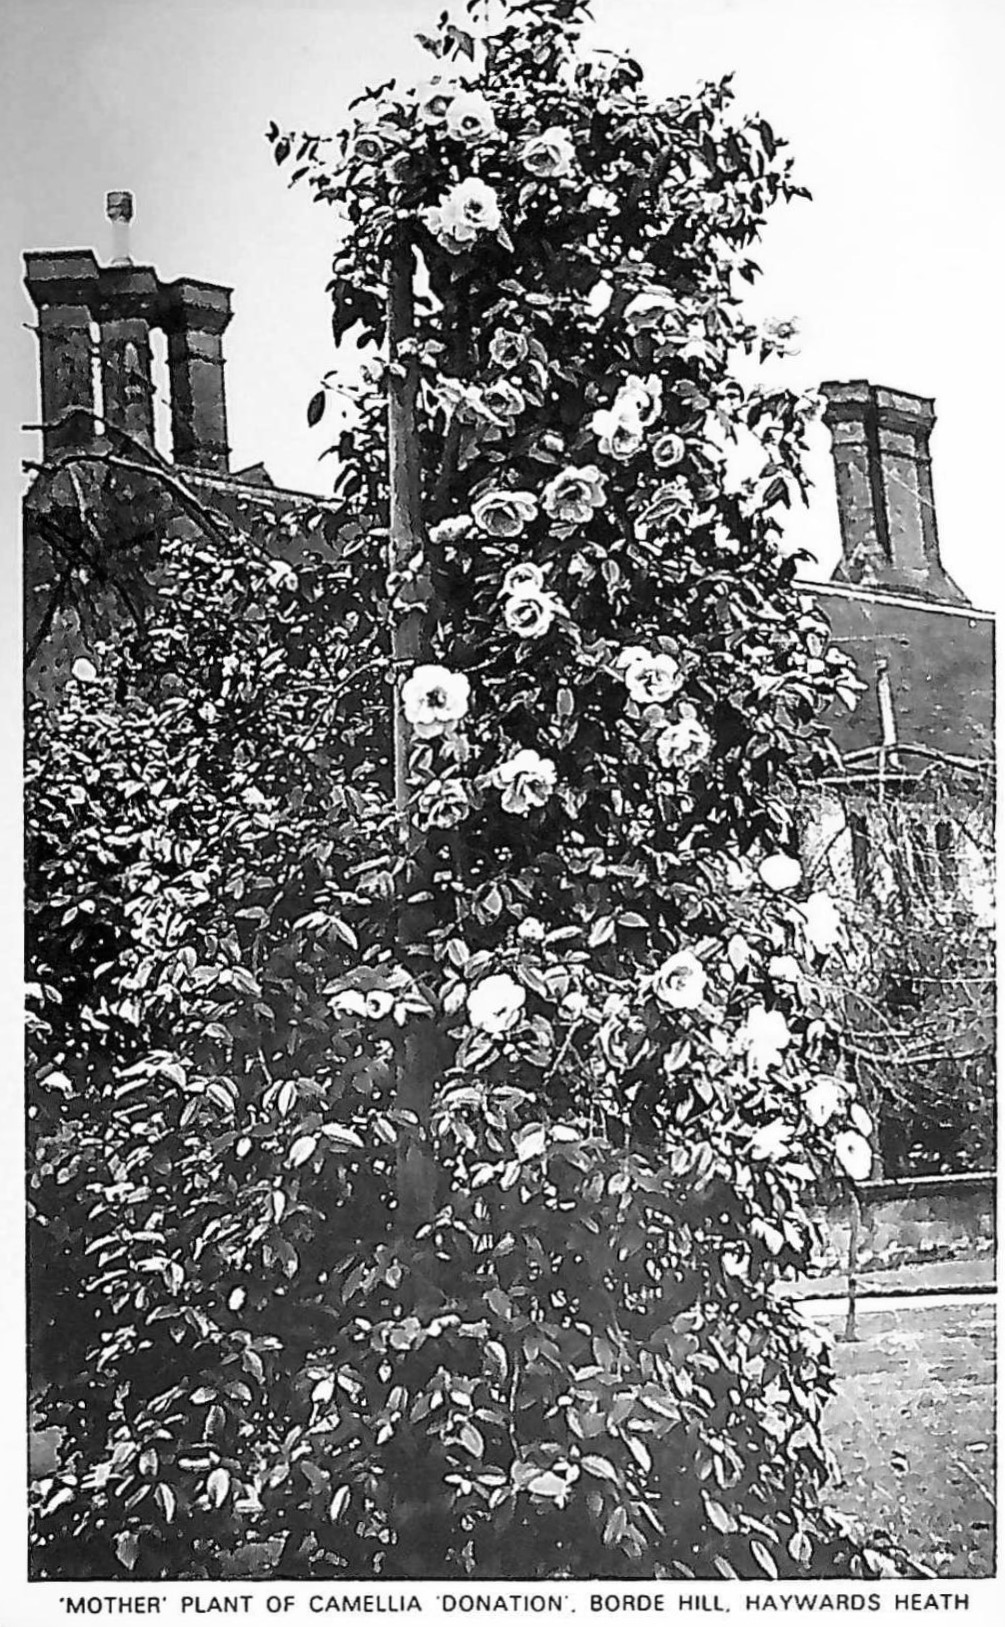 Post Card of Camellia 'Donation' Mother Plant at Borde Hill